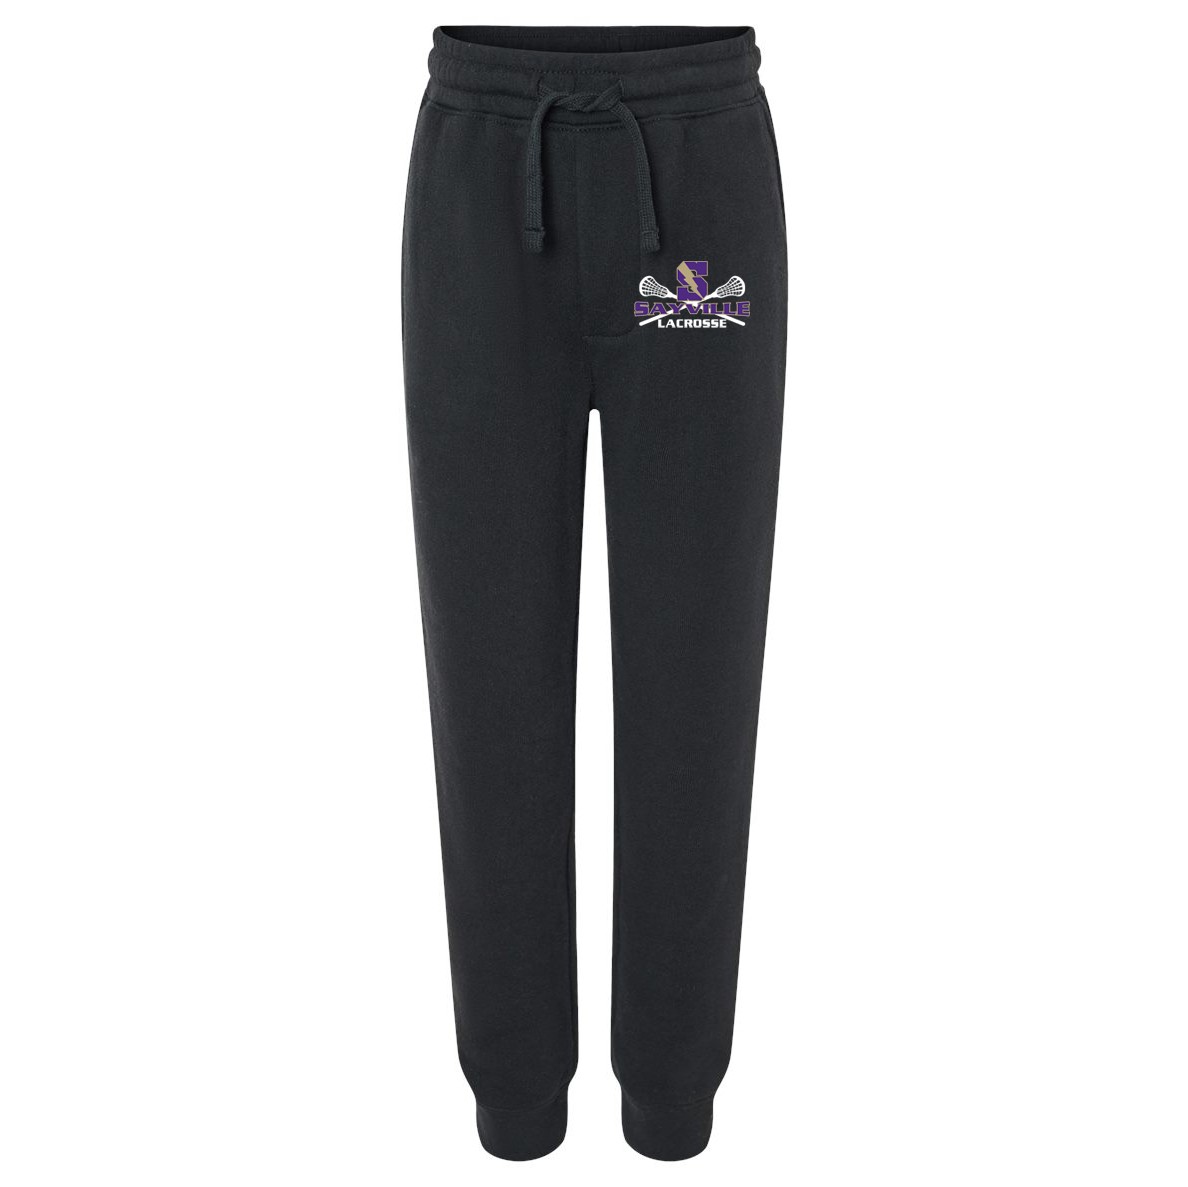 Sayville Lacrosse Youth Lightweight Special Blend Sweatpants